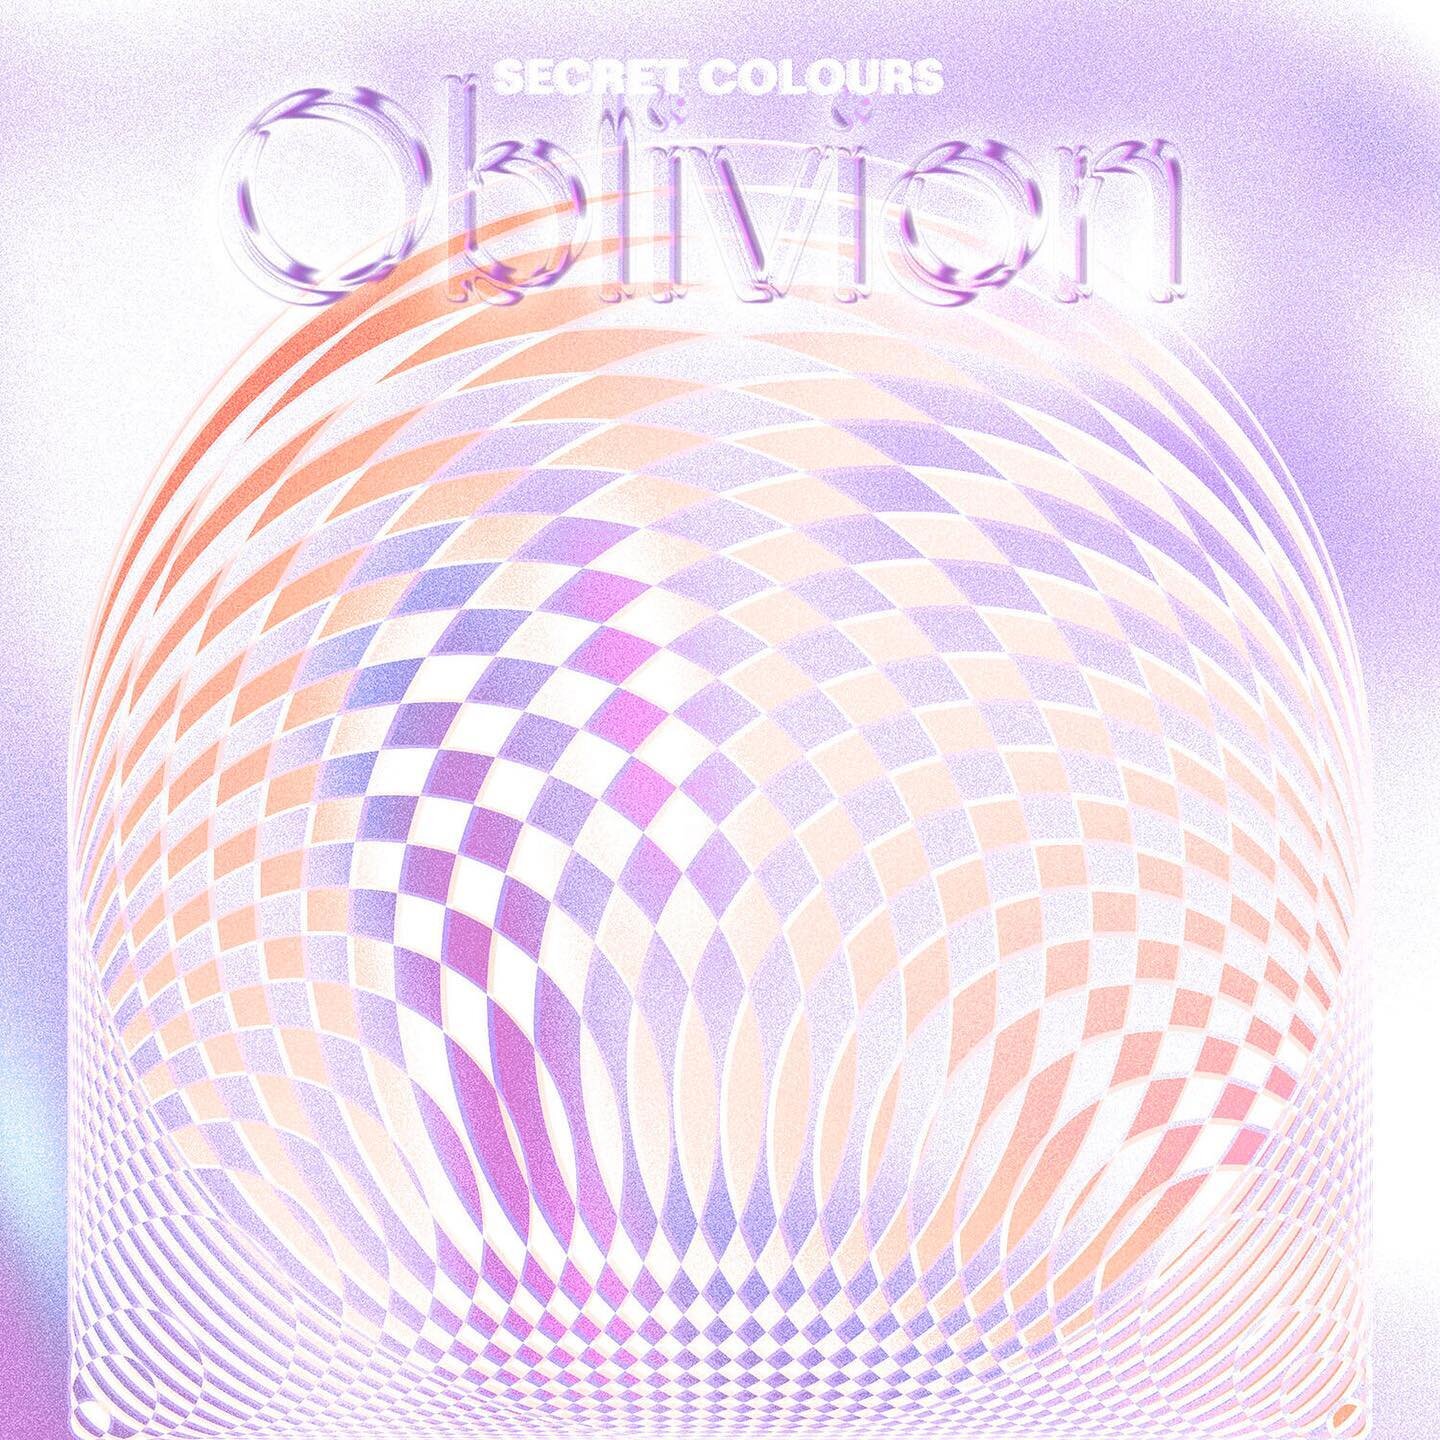 Our new single &ldquo;Oblivion&rdquo; is out now featuring &ldquo;I Feel Love&rdquo; (Donna Summer Cover) 🌎 Available as limited edition 7&rdquo; vinyl on our Bandcamp and through @hypnoticbridge 

Artwork by @beccachristman